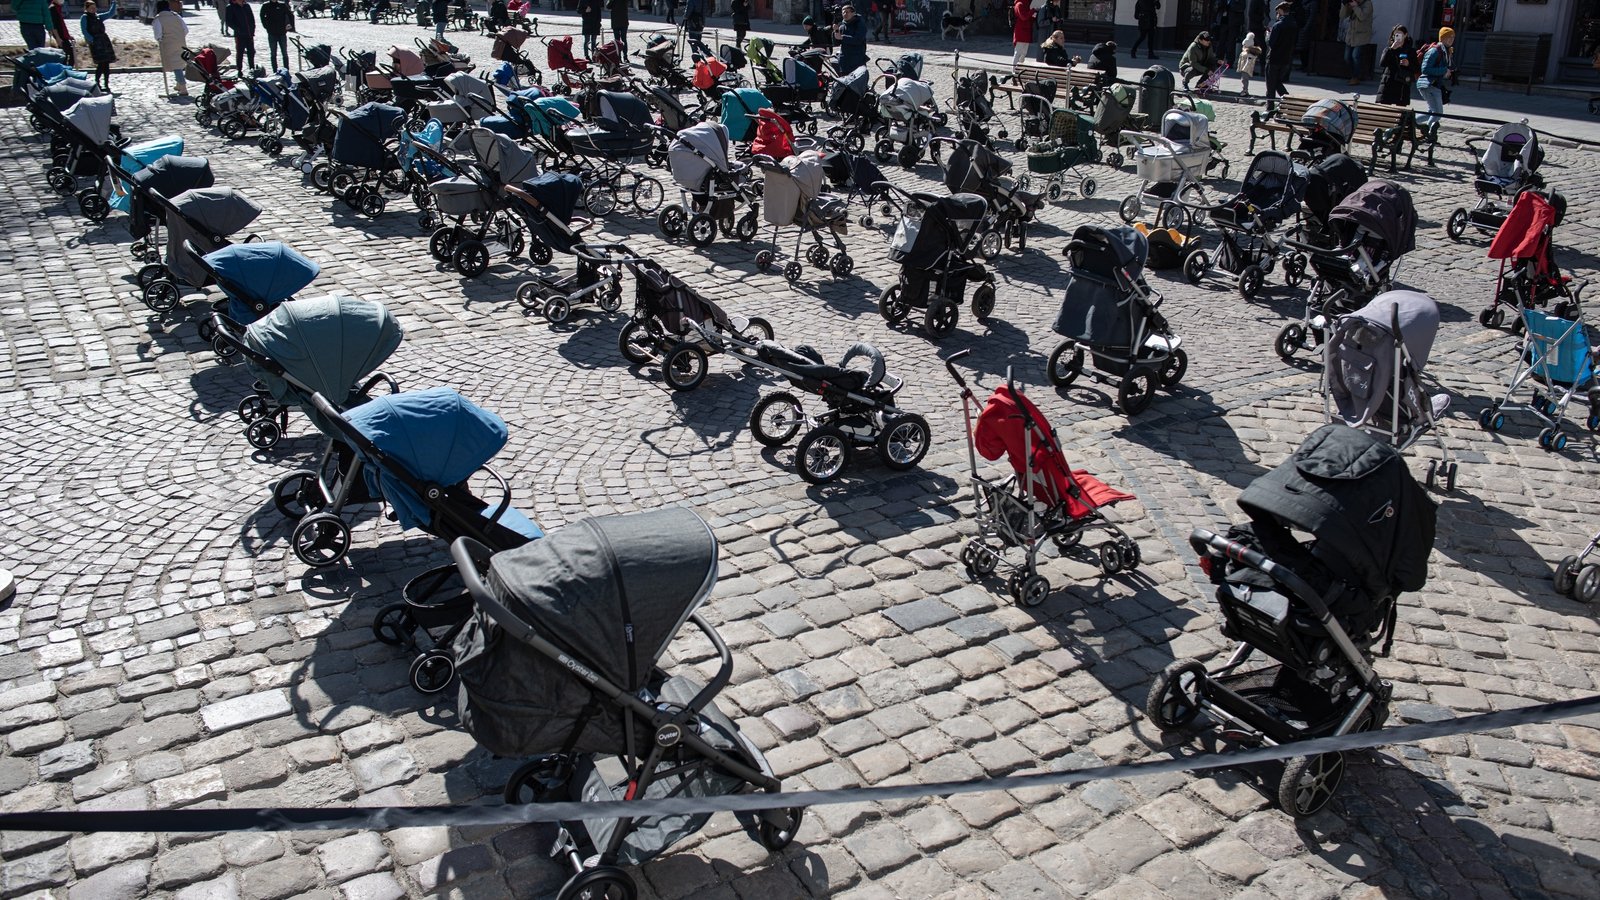 Image - Empty prams placed outside the Lviv city council to highlight the number of children being killed in the invasion